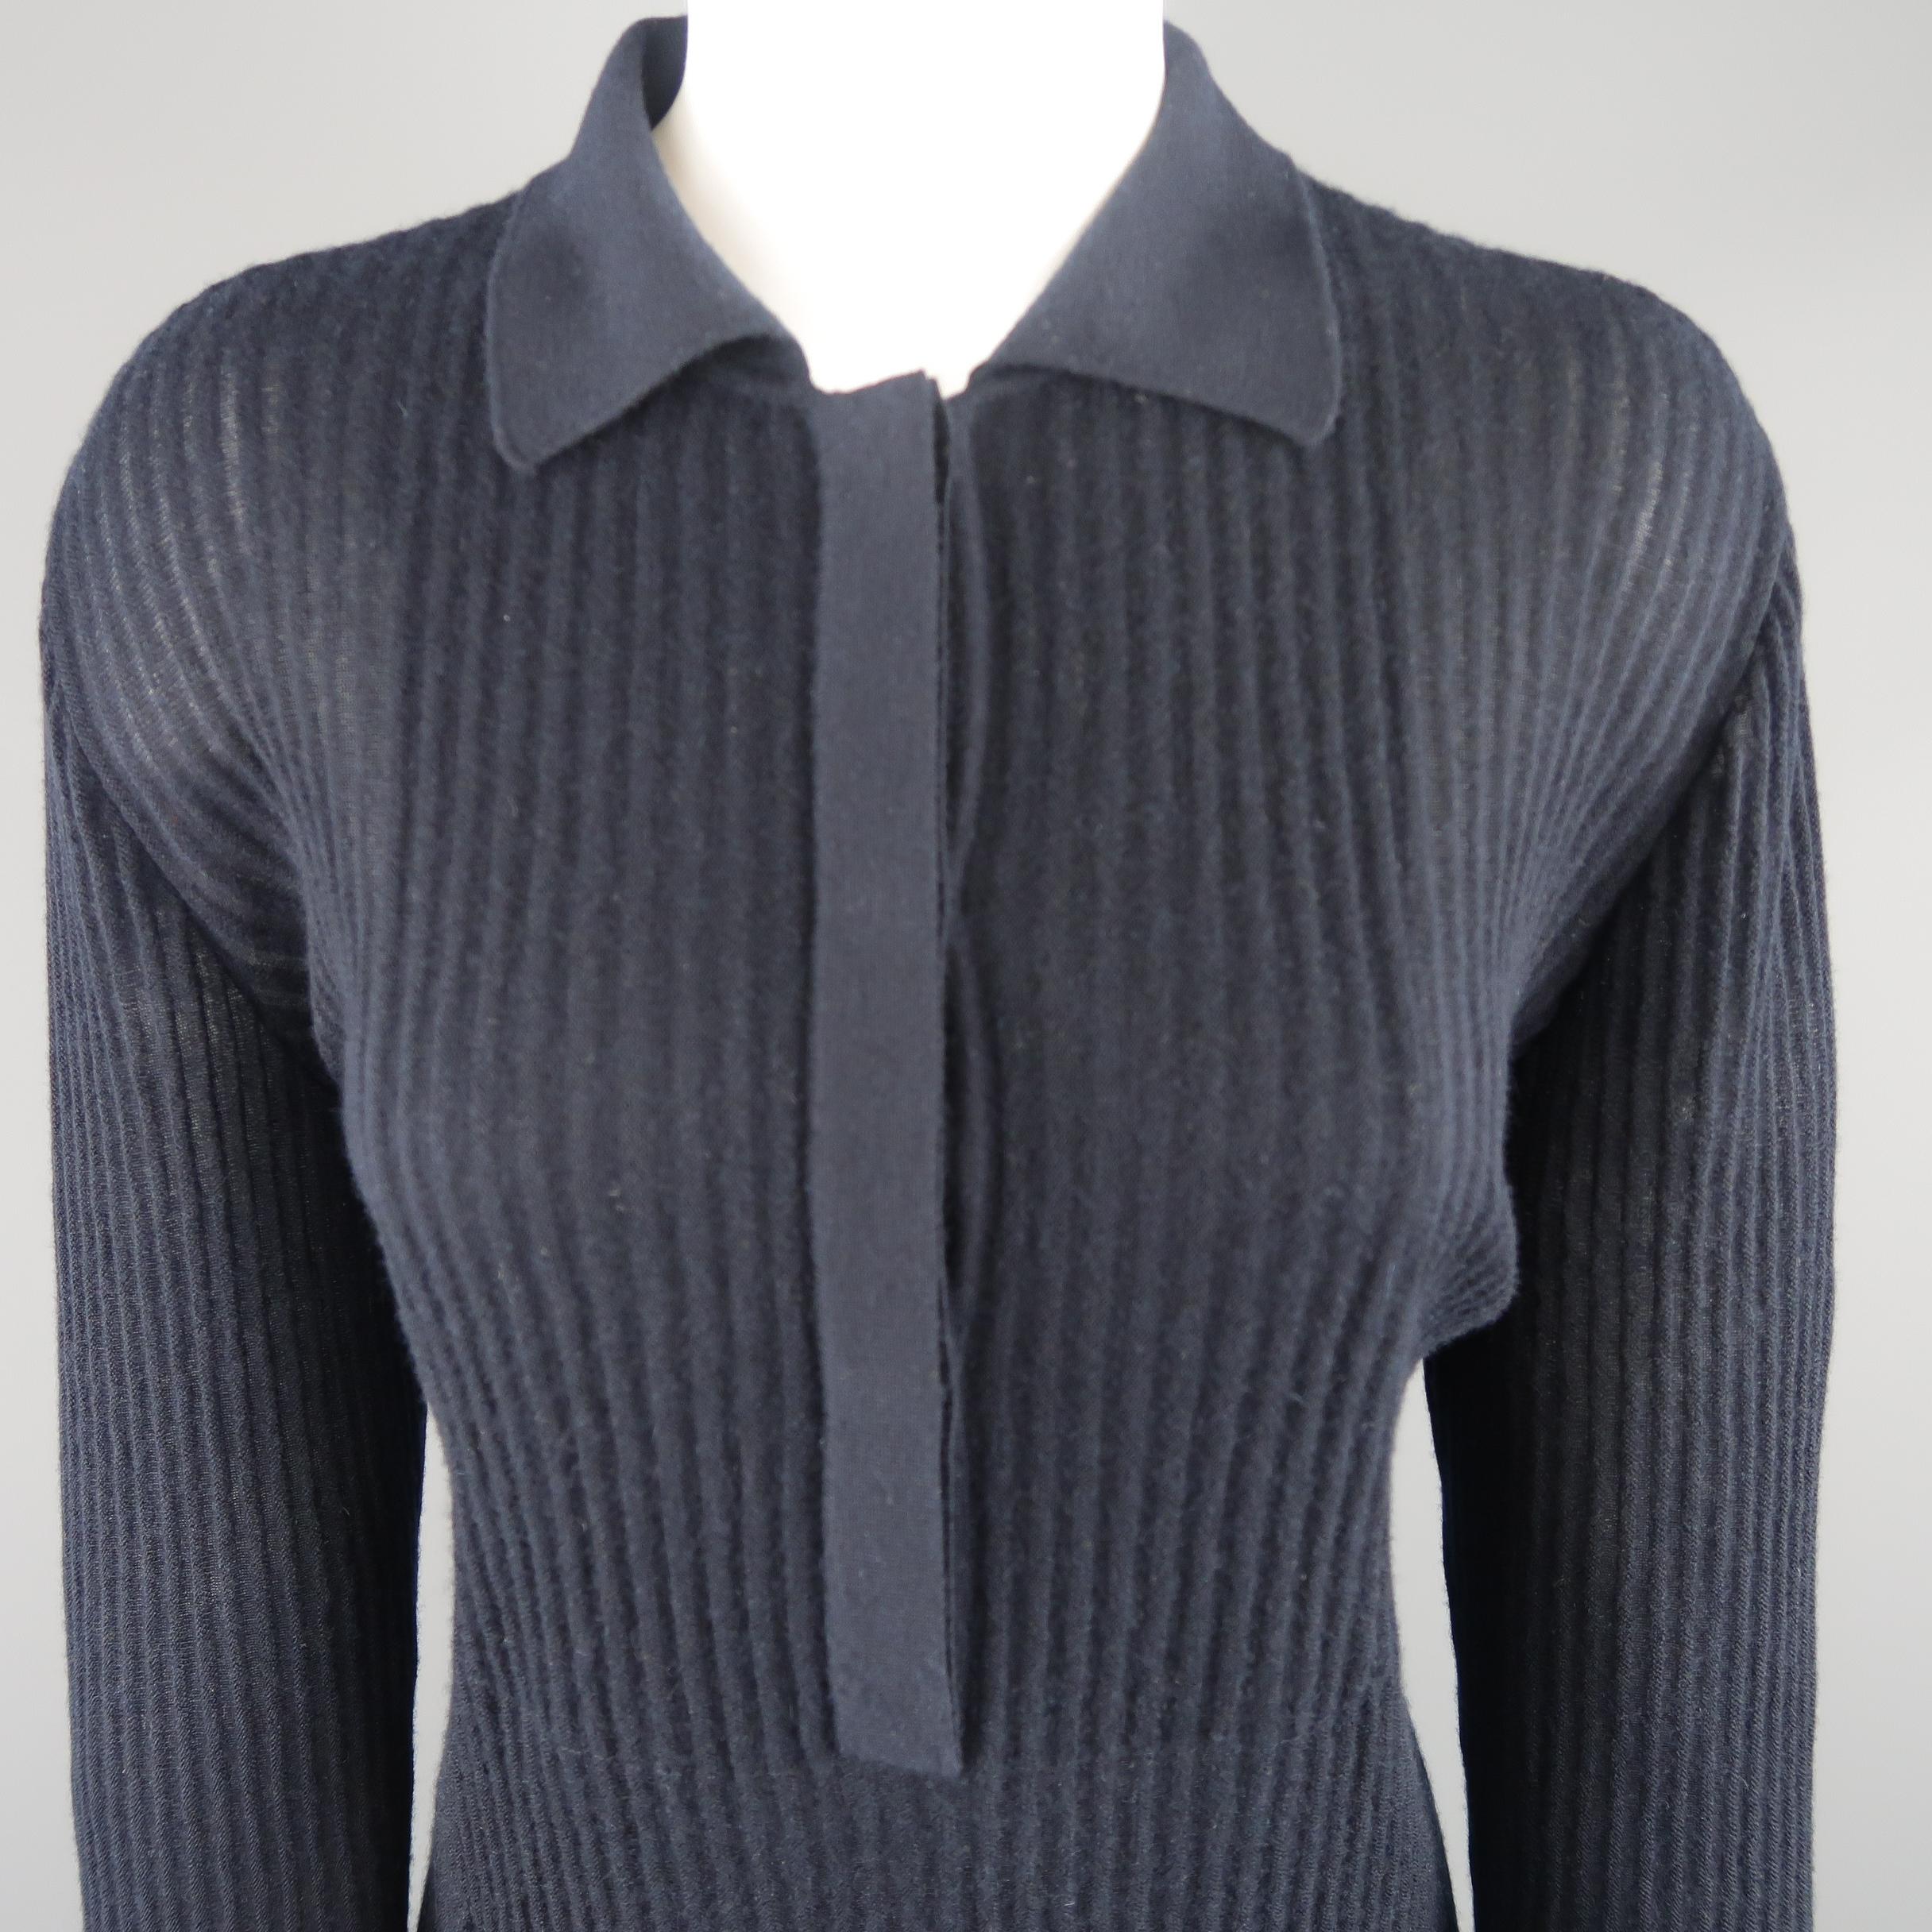 GIORGIO ARMANI pullover comes in sheer ribbed cashmere knit with a half button collared front. Made in Italy.
 
Excellent Pre-Owned Condition.
Marked: IT 46
 
Measurements:
 
Shoulder: 16 in.
Bust: 40 in.
Sleeve: 24 in.
Length: 26 in.